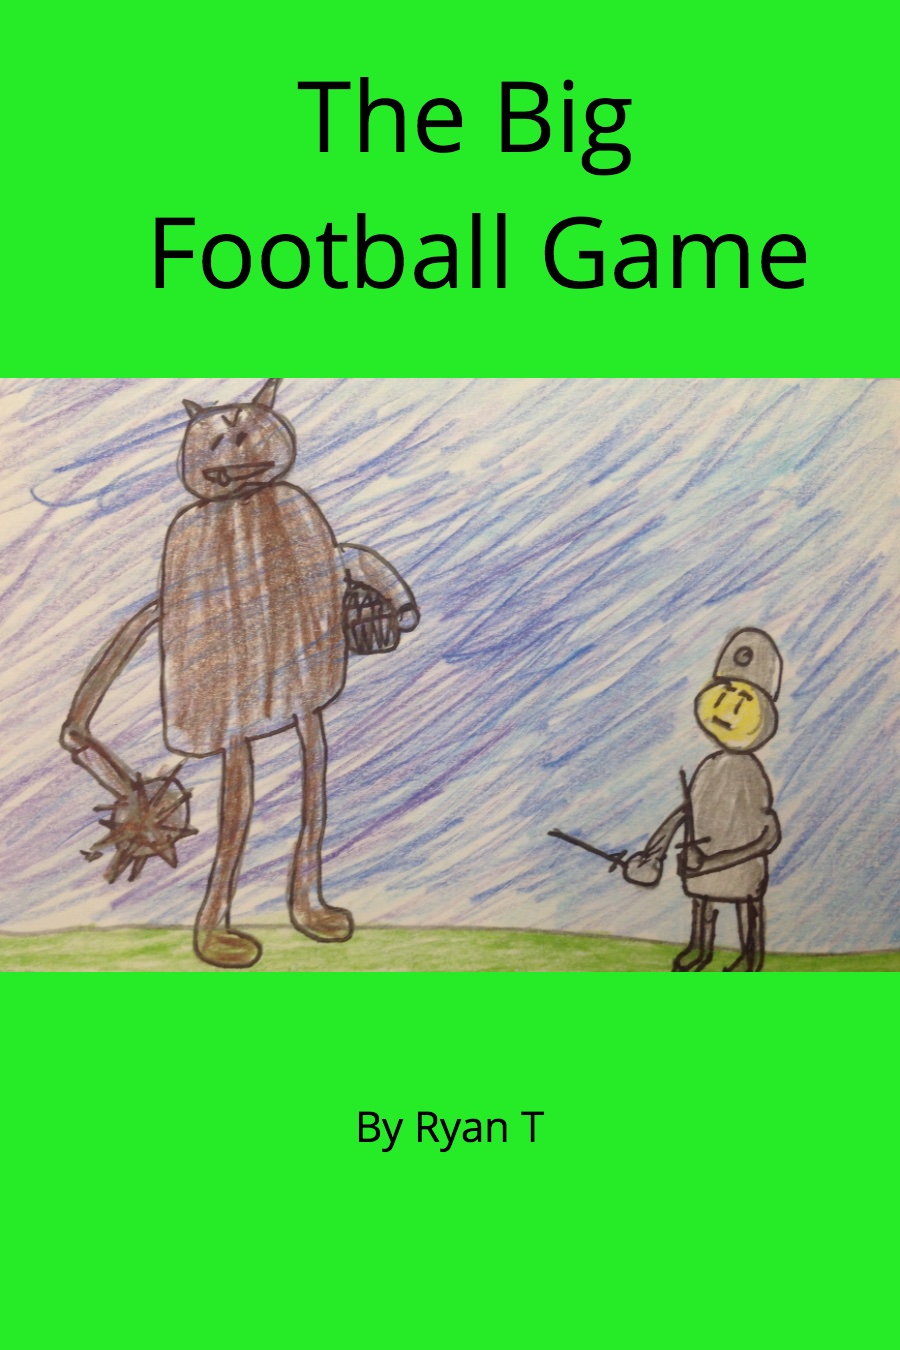 The Big Football Game by Ryan T